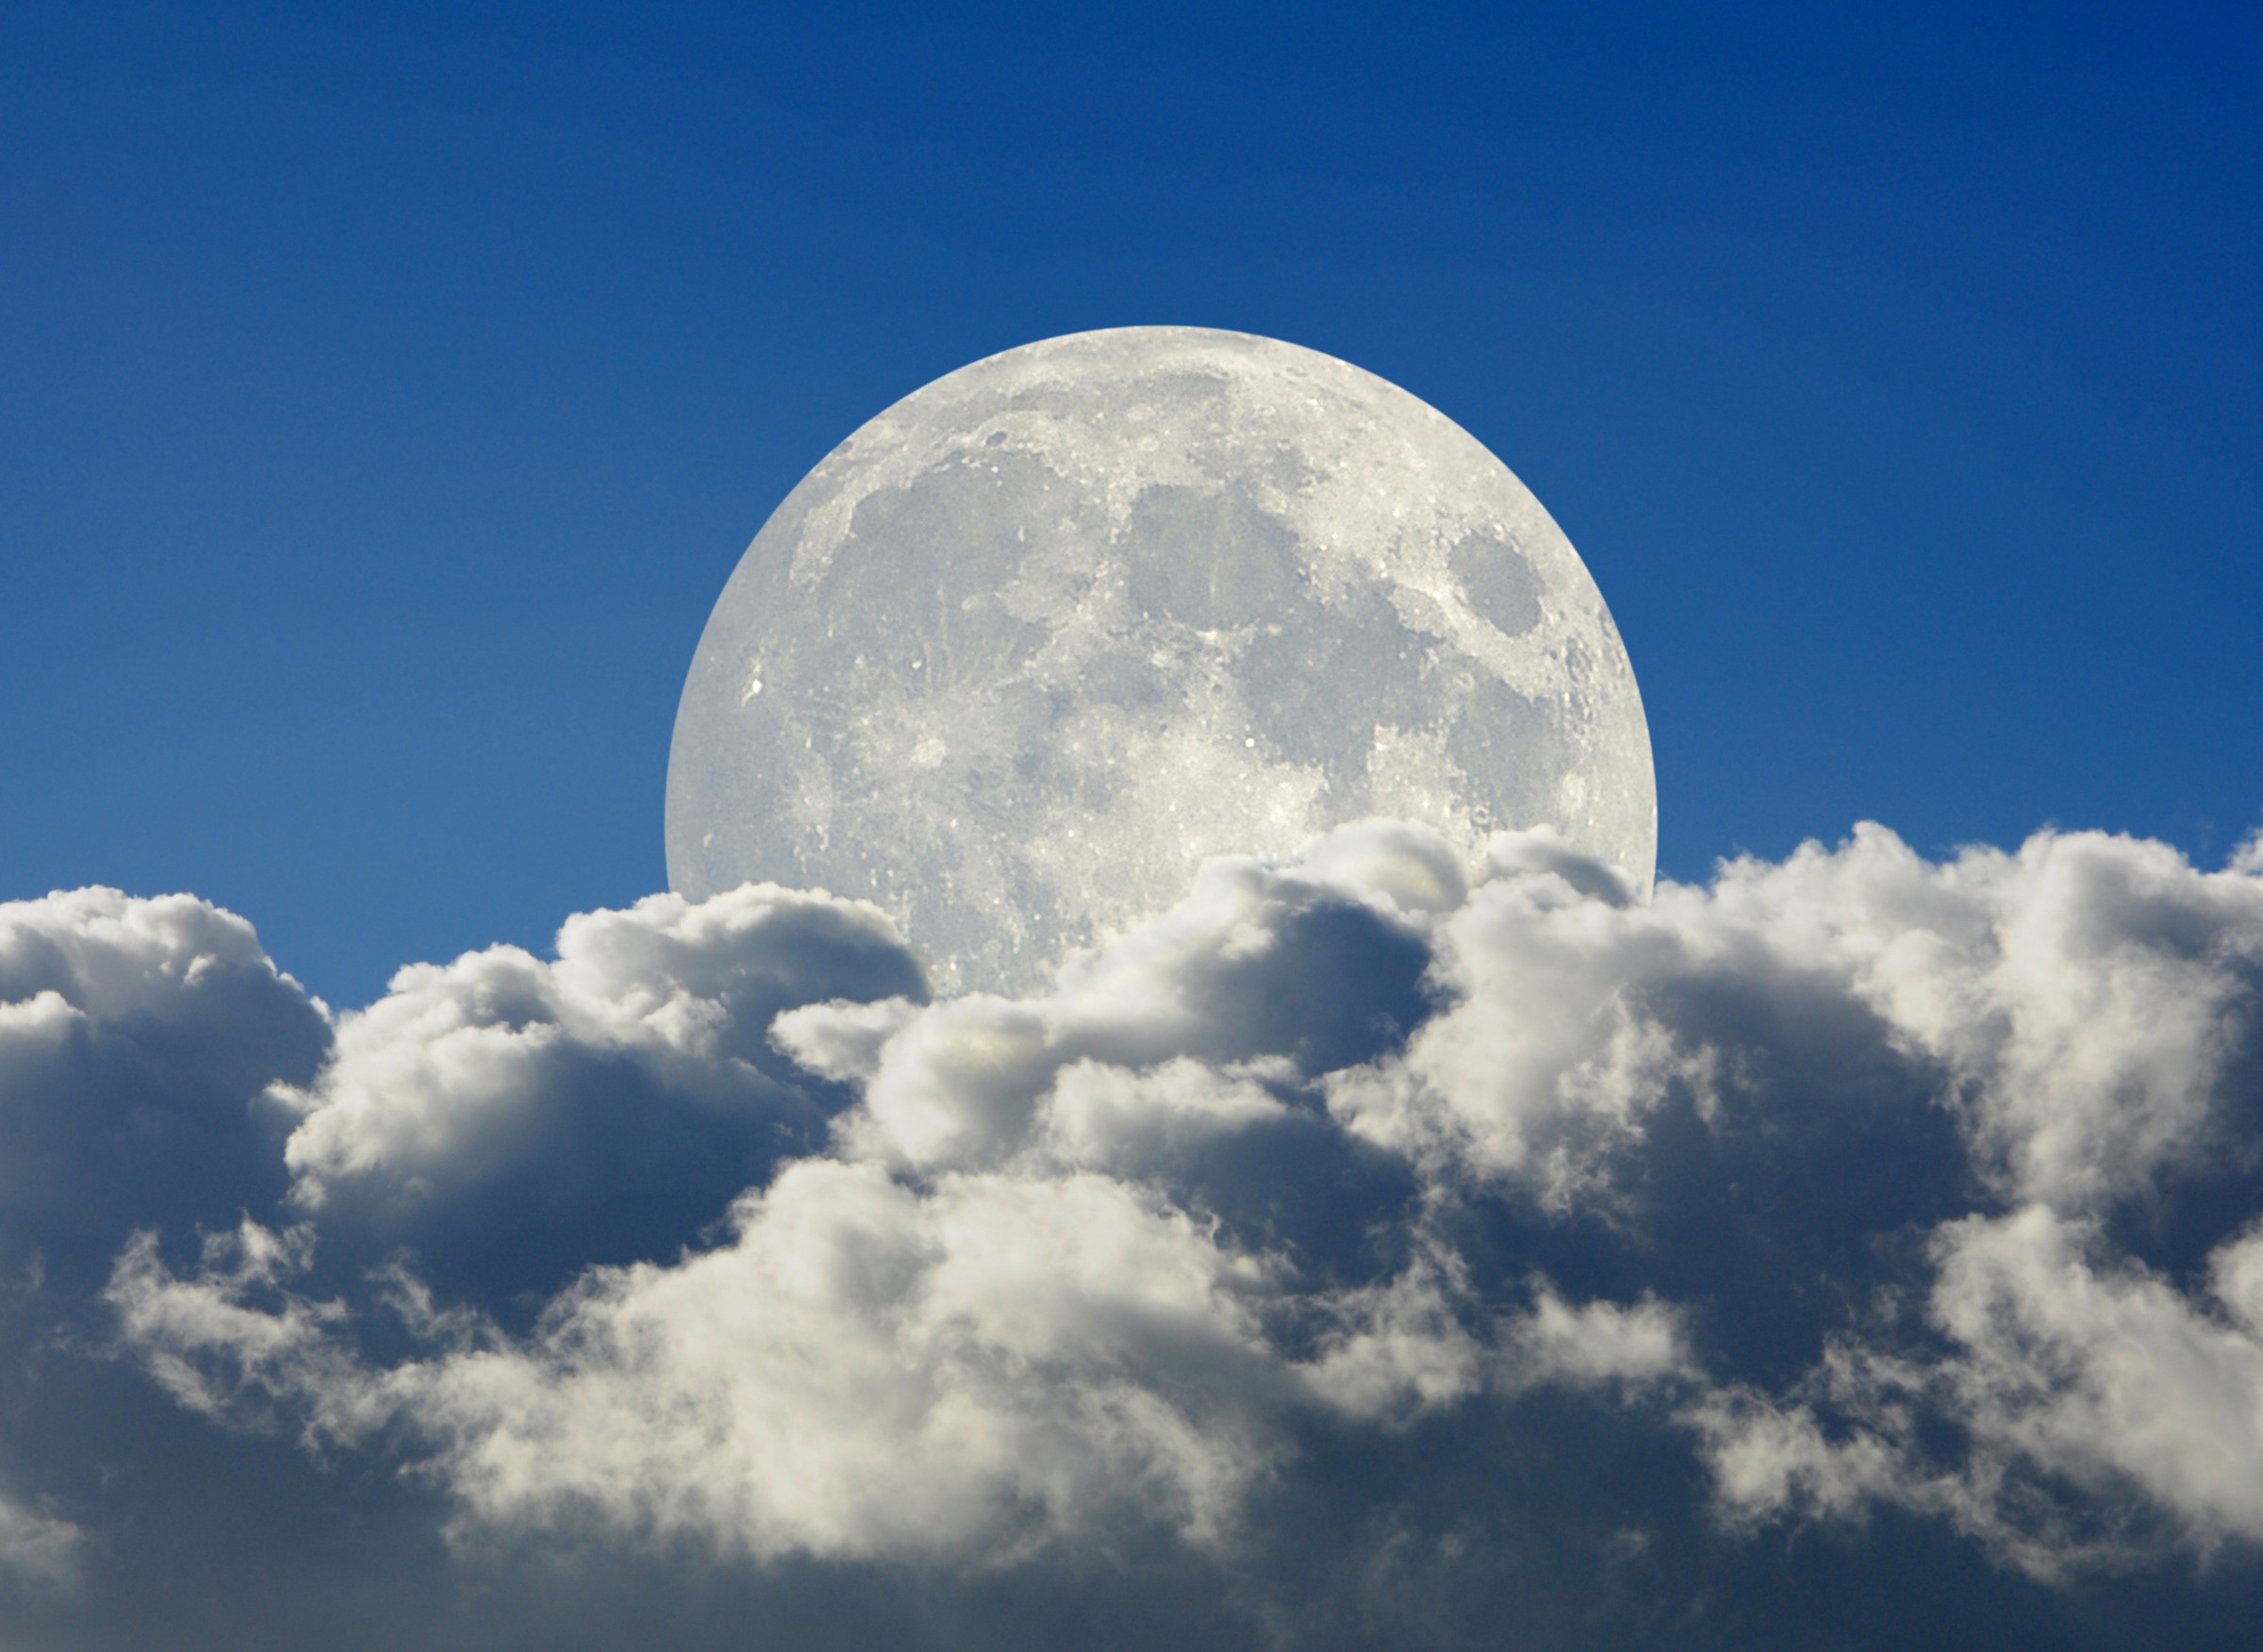 Fototapete »Big Moon and Clouds«